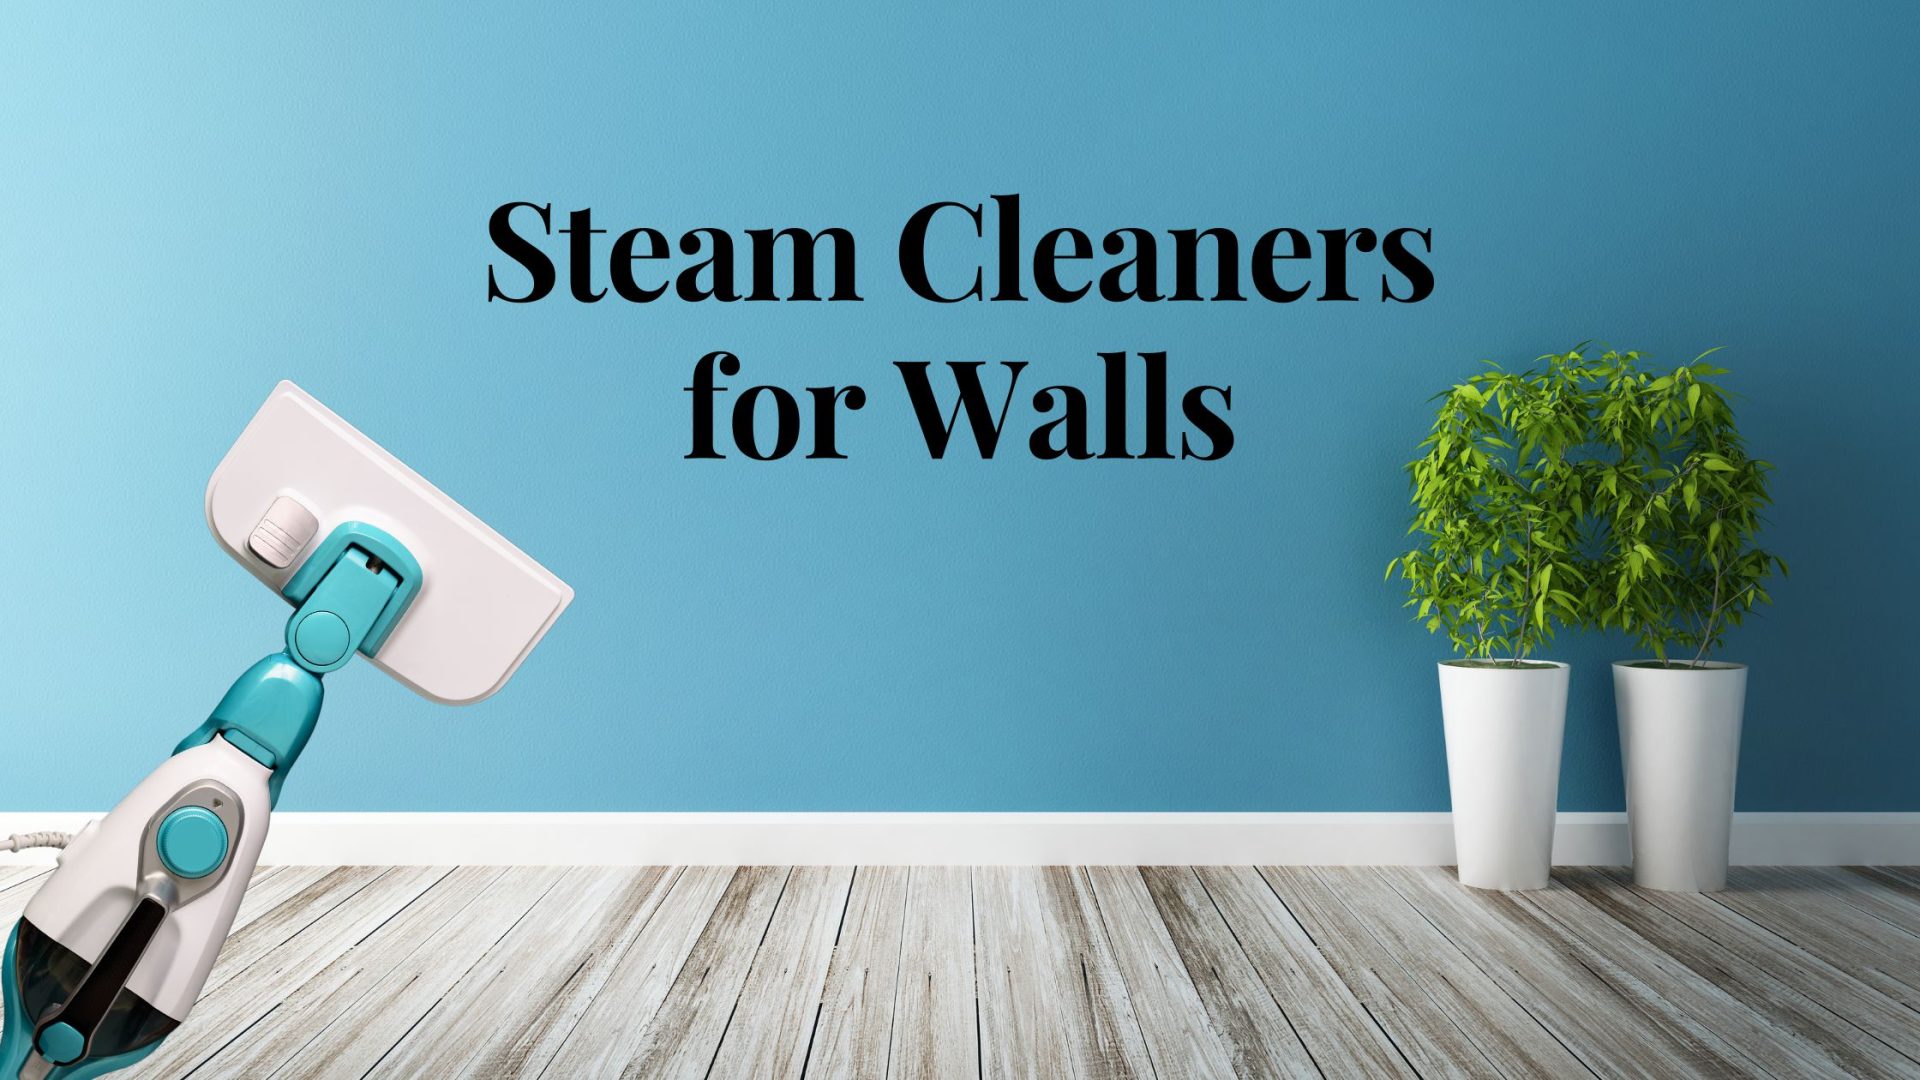 Steam Cleaners for Walls